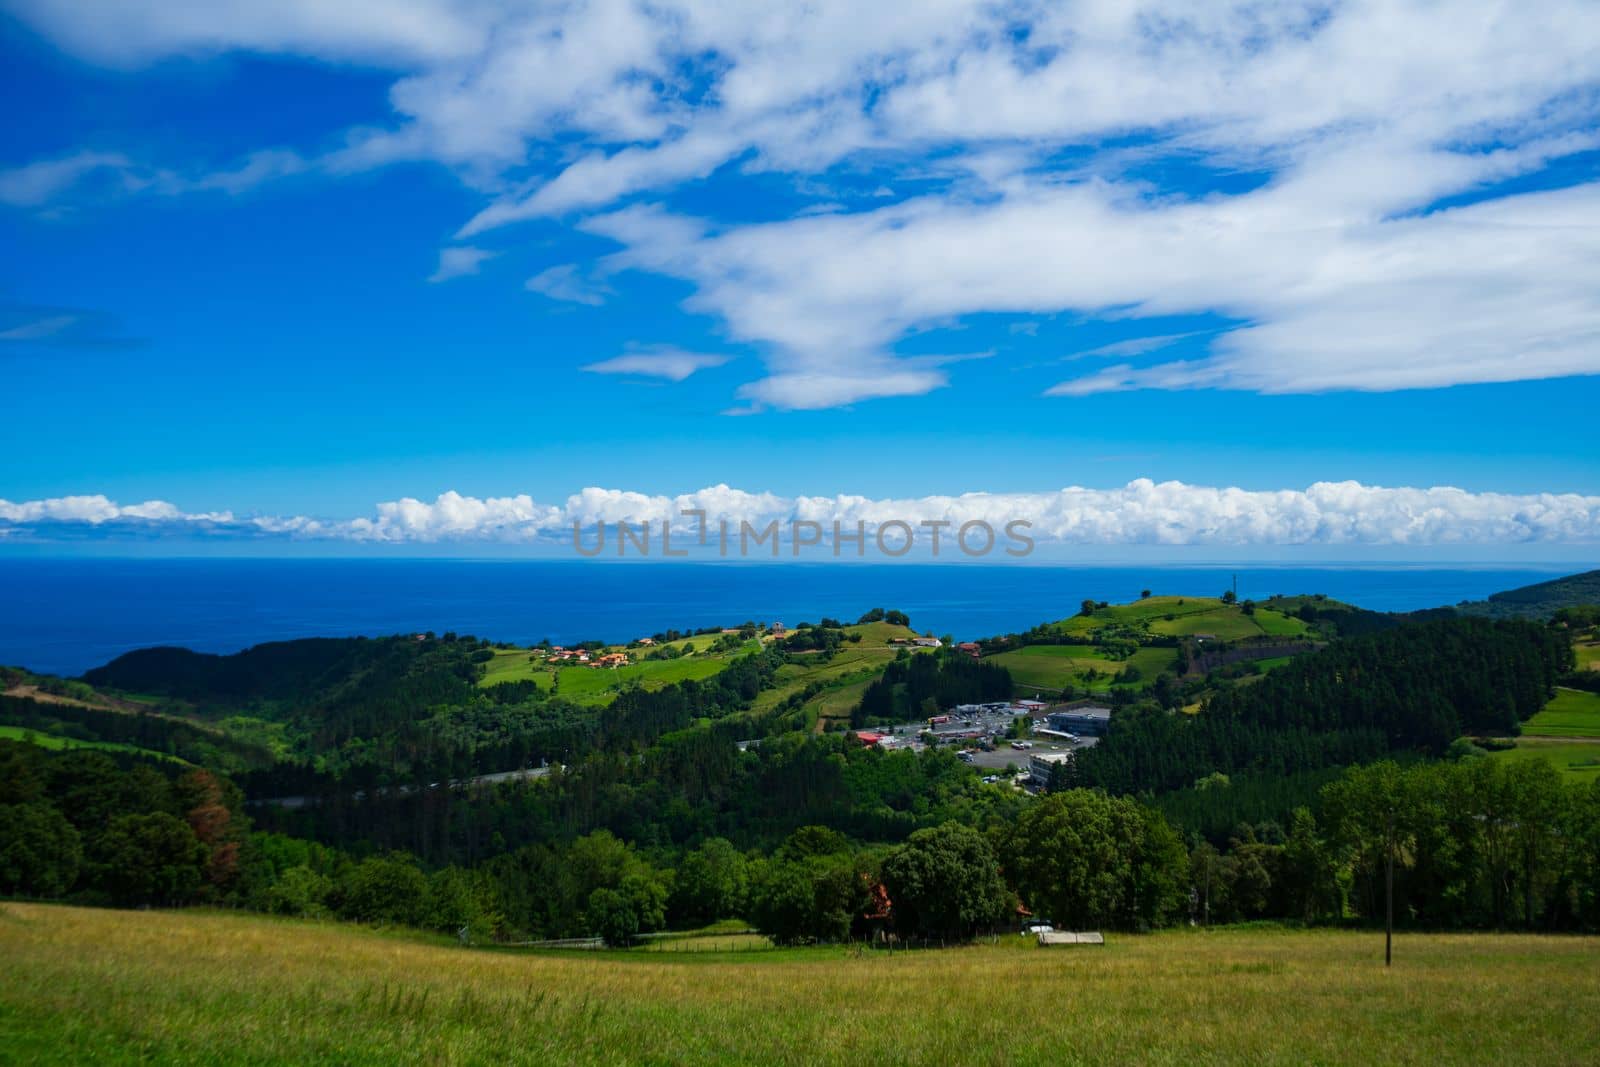 Landscape overlooking the green hills and the Atlantic Ocean. Coast of Basque Country, Spain.